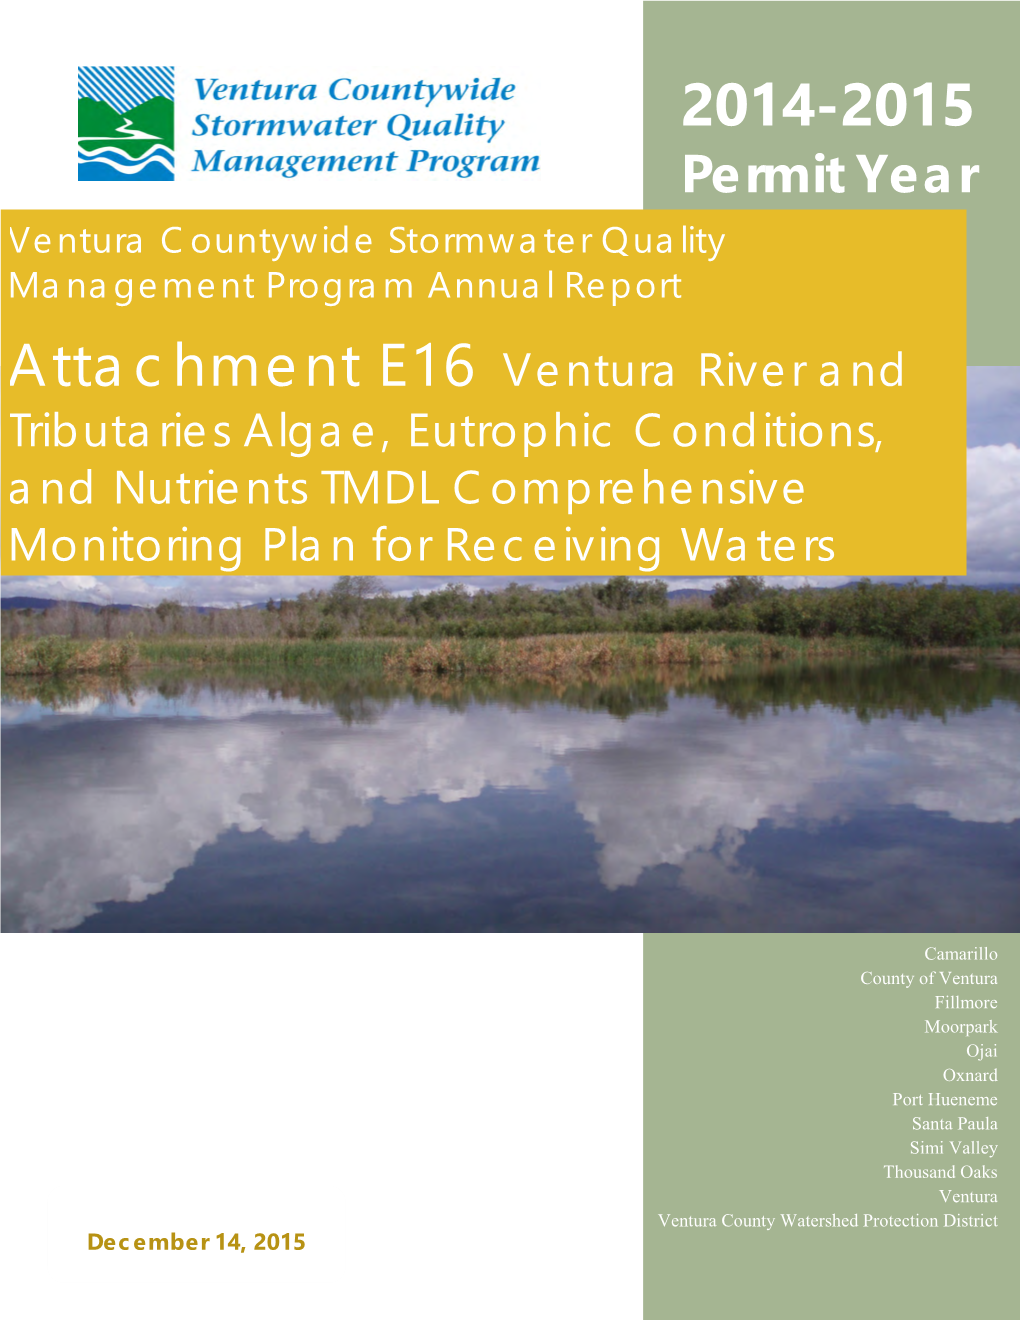 Ventura River and Tributaries Algae, Eutrophic Conditions, and Nutrients Total Maximum Daily Load